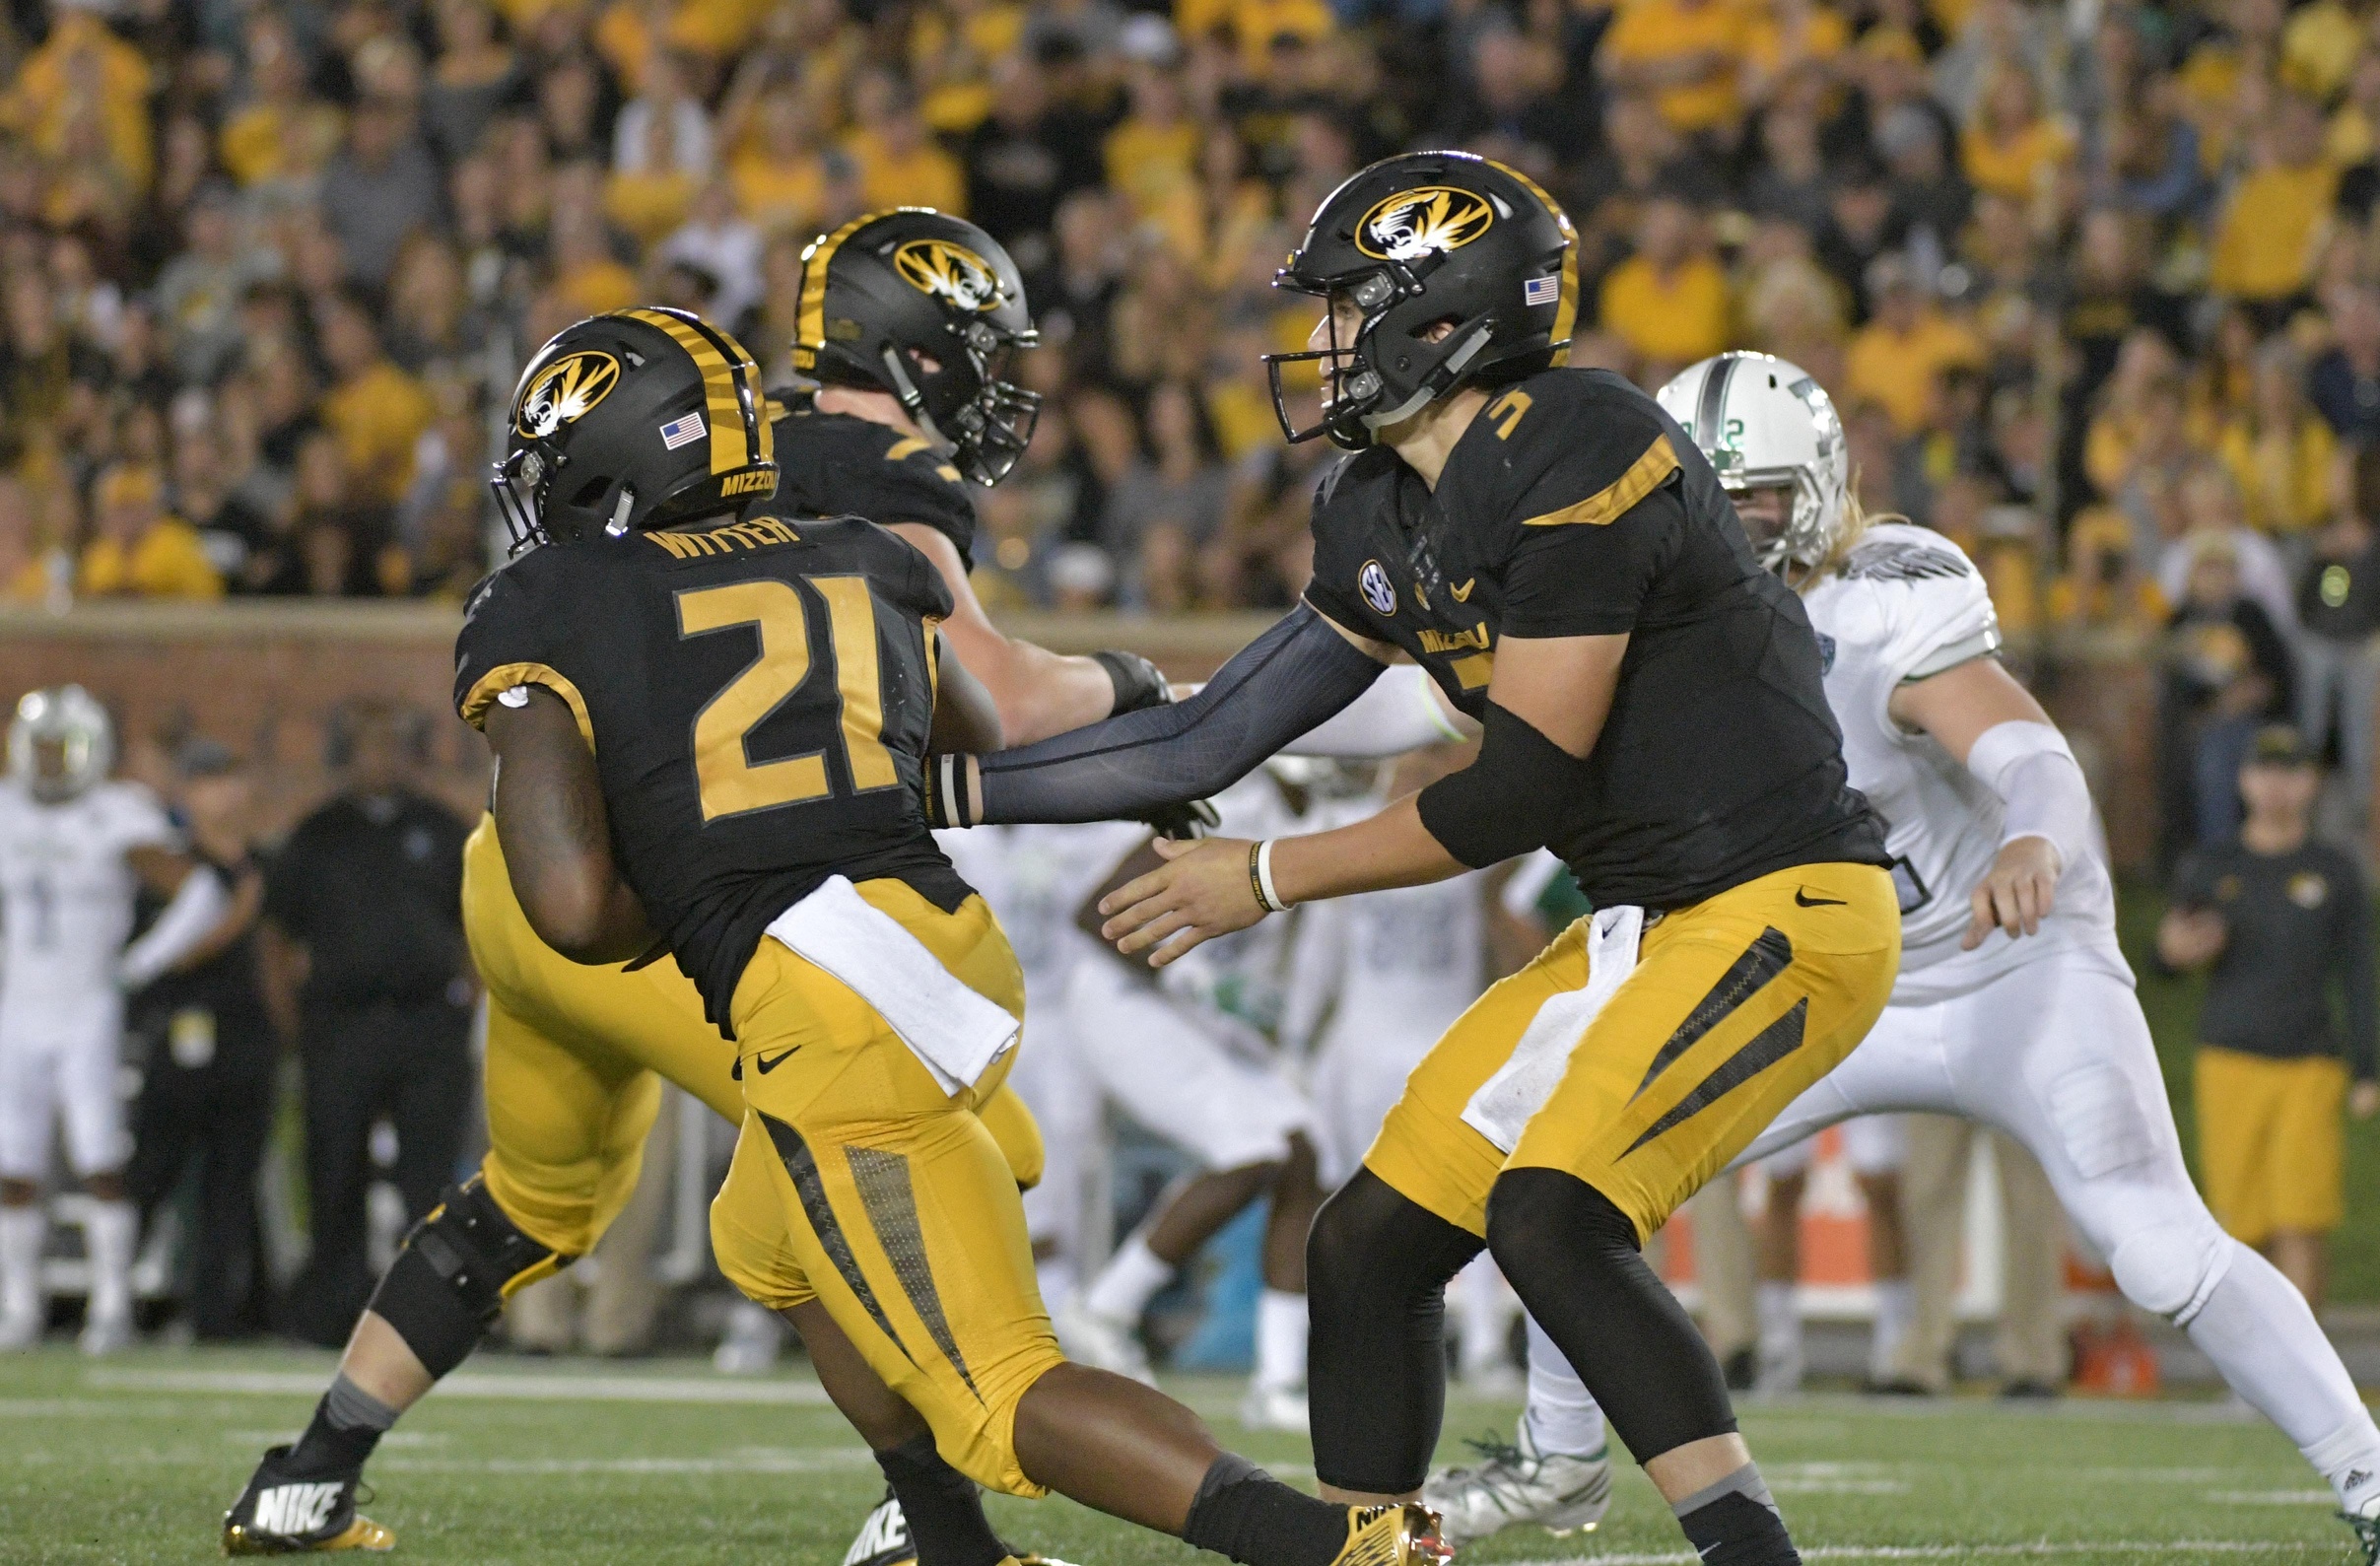 Sep 10, 2016; Columbia, MO, USA; Missouri Tigers quarterback Drew Lock (3) hands off to running back Ish Witter (21) during the first half against the Eastern Michigan Eagles at Faurot Field. Mandatory Credit: Denny Medley-USA TODAY Sports